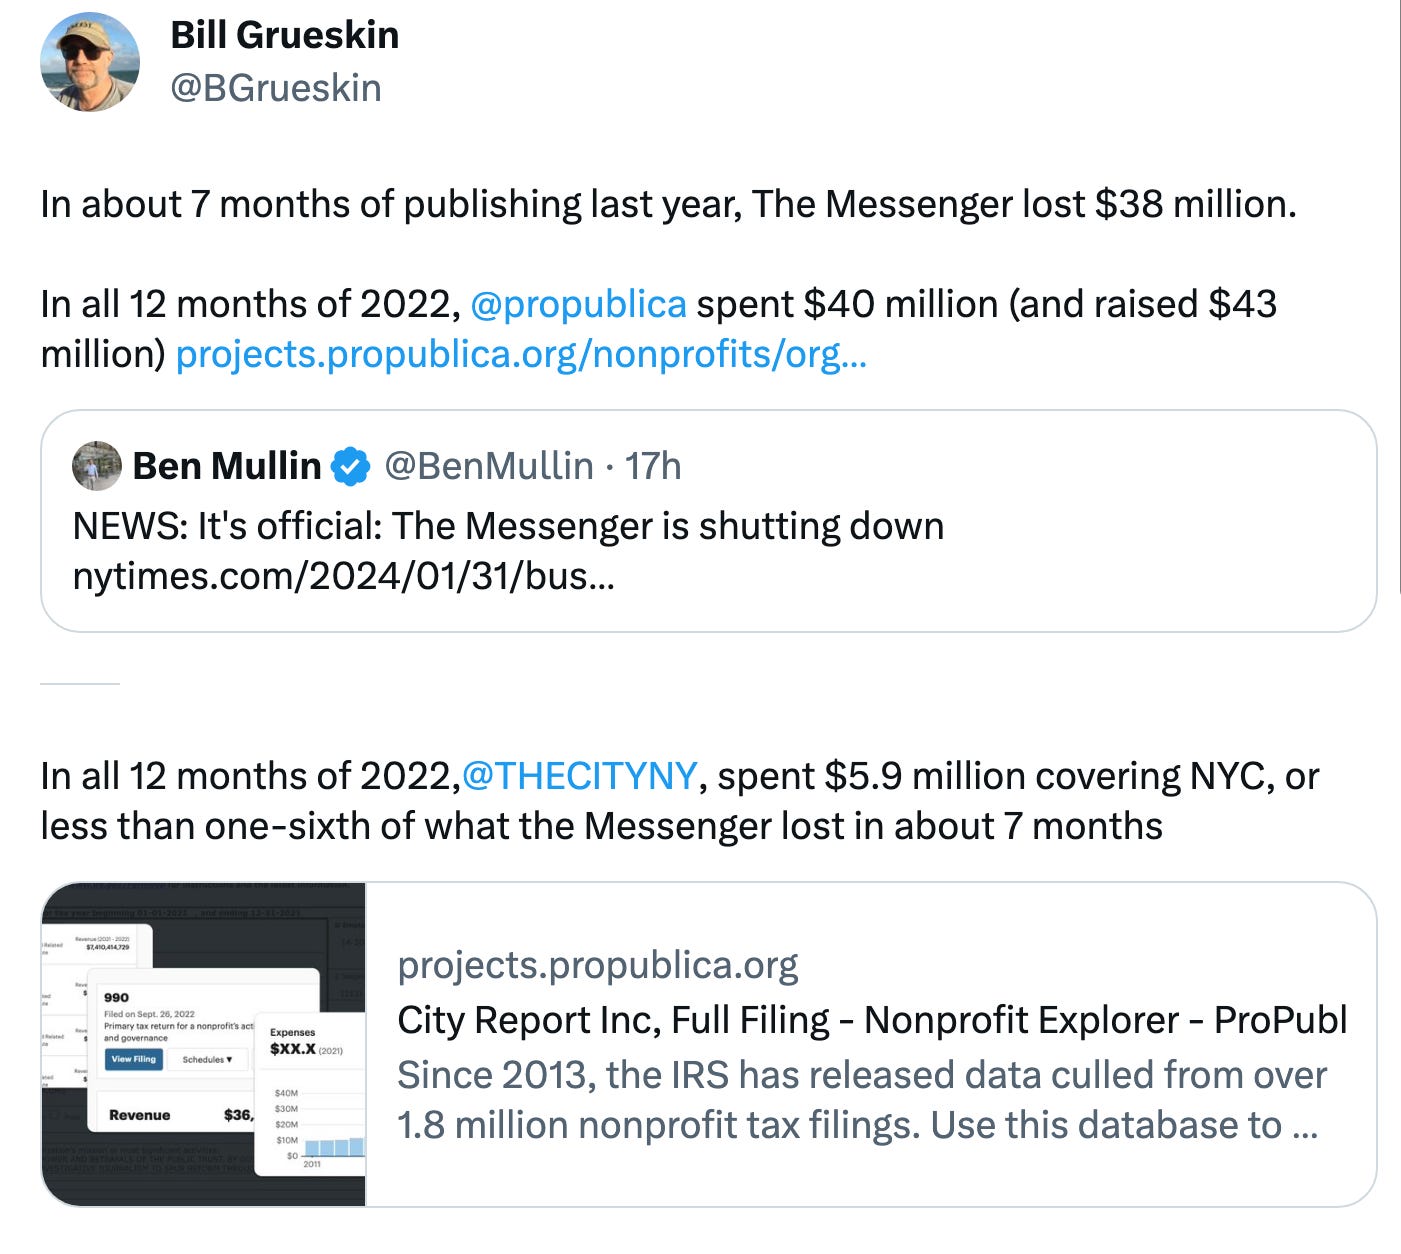 In about 7 months of publishing last year, The Messenger lost $38 million.  In all 12 months of 2022,  @propublica  spent $40 million (and raised $43 million) https://projects.propublica.org/nonprofits/organizations/142007220/202312619349301136/full Quote Ben Mullin @BenMullin · 17h NEWS: It's official: The Messenger is shutting down https://nytimes.com/2024/01/31/business/media/messenger-closing-down.html In all 12 months of 2022, @THECITYNY , spent $5.9 million covering NYC, or less than one-sixth of what the Messenger lost in about 7 months